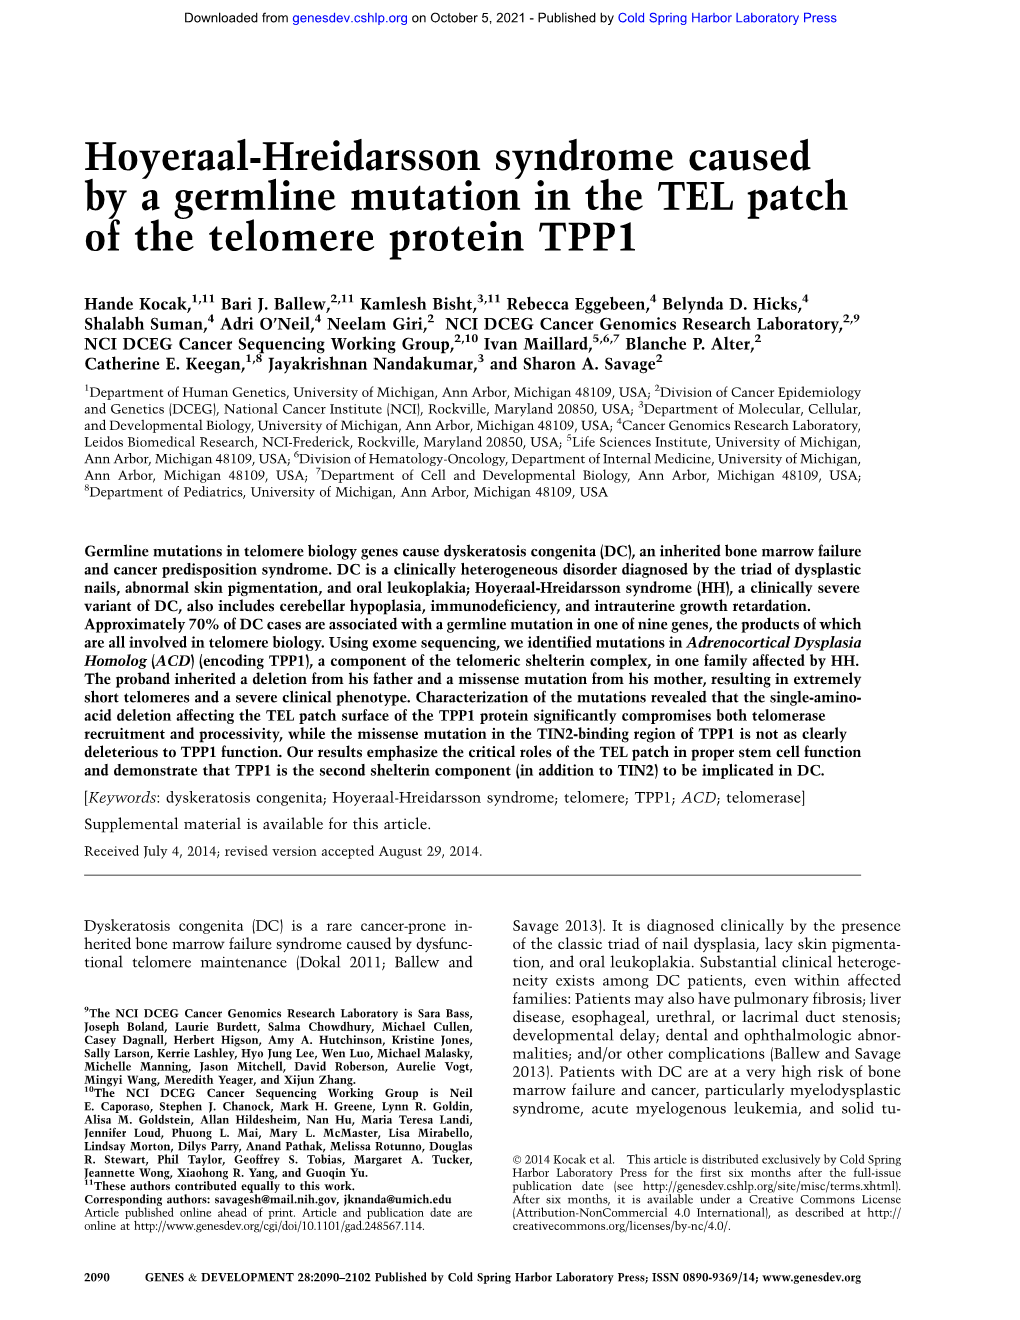 Hoyeraal-Hreidarsson Syndrome Caused by a Germline Mutation in the TEL Patch of the Telomere Protein TPP1